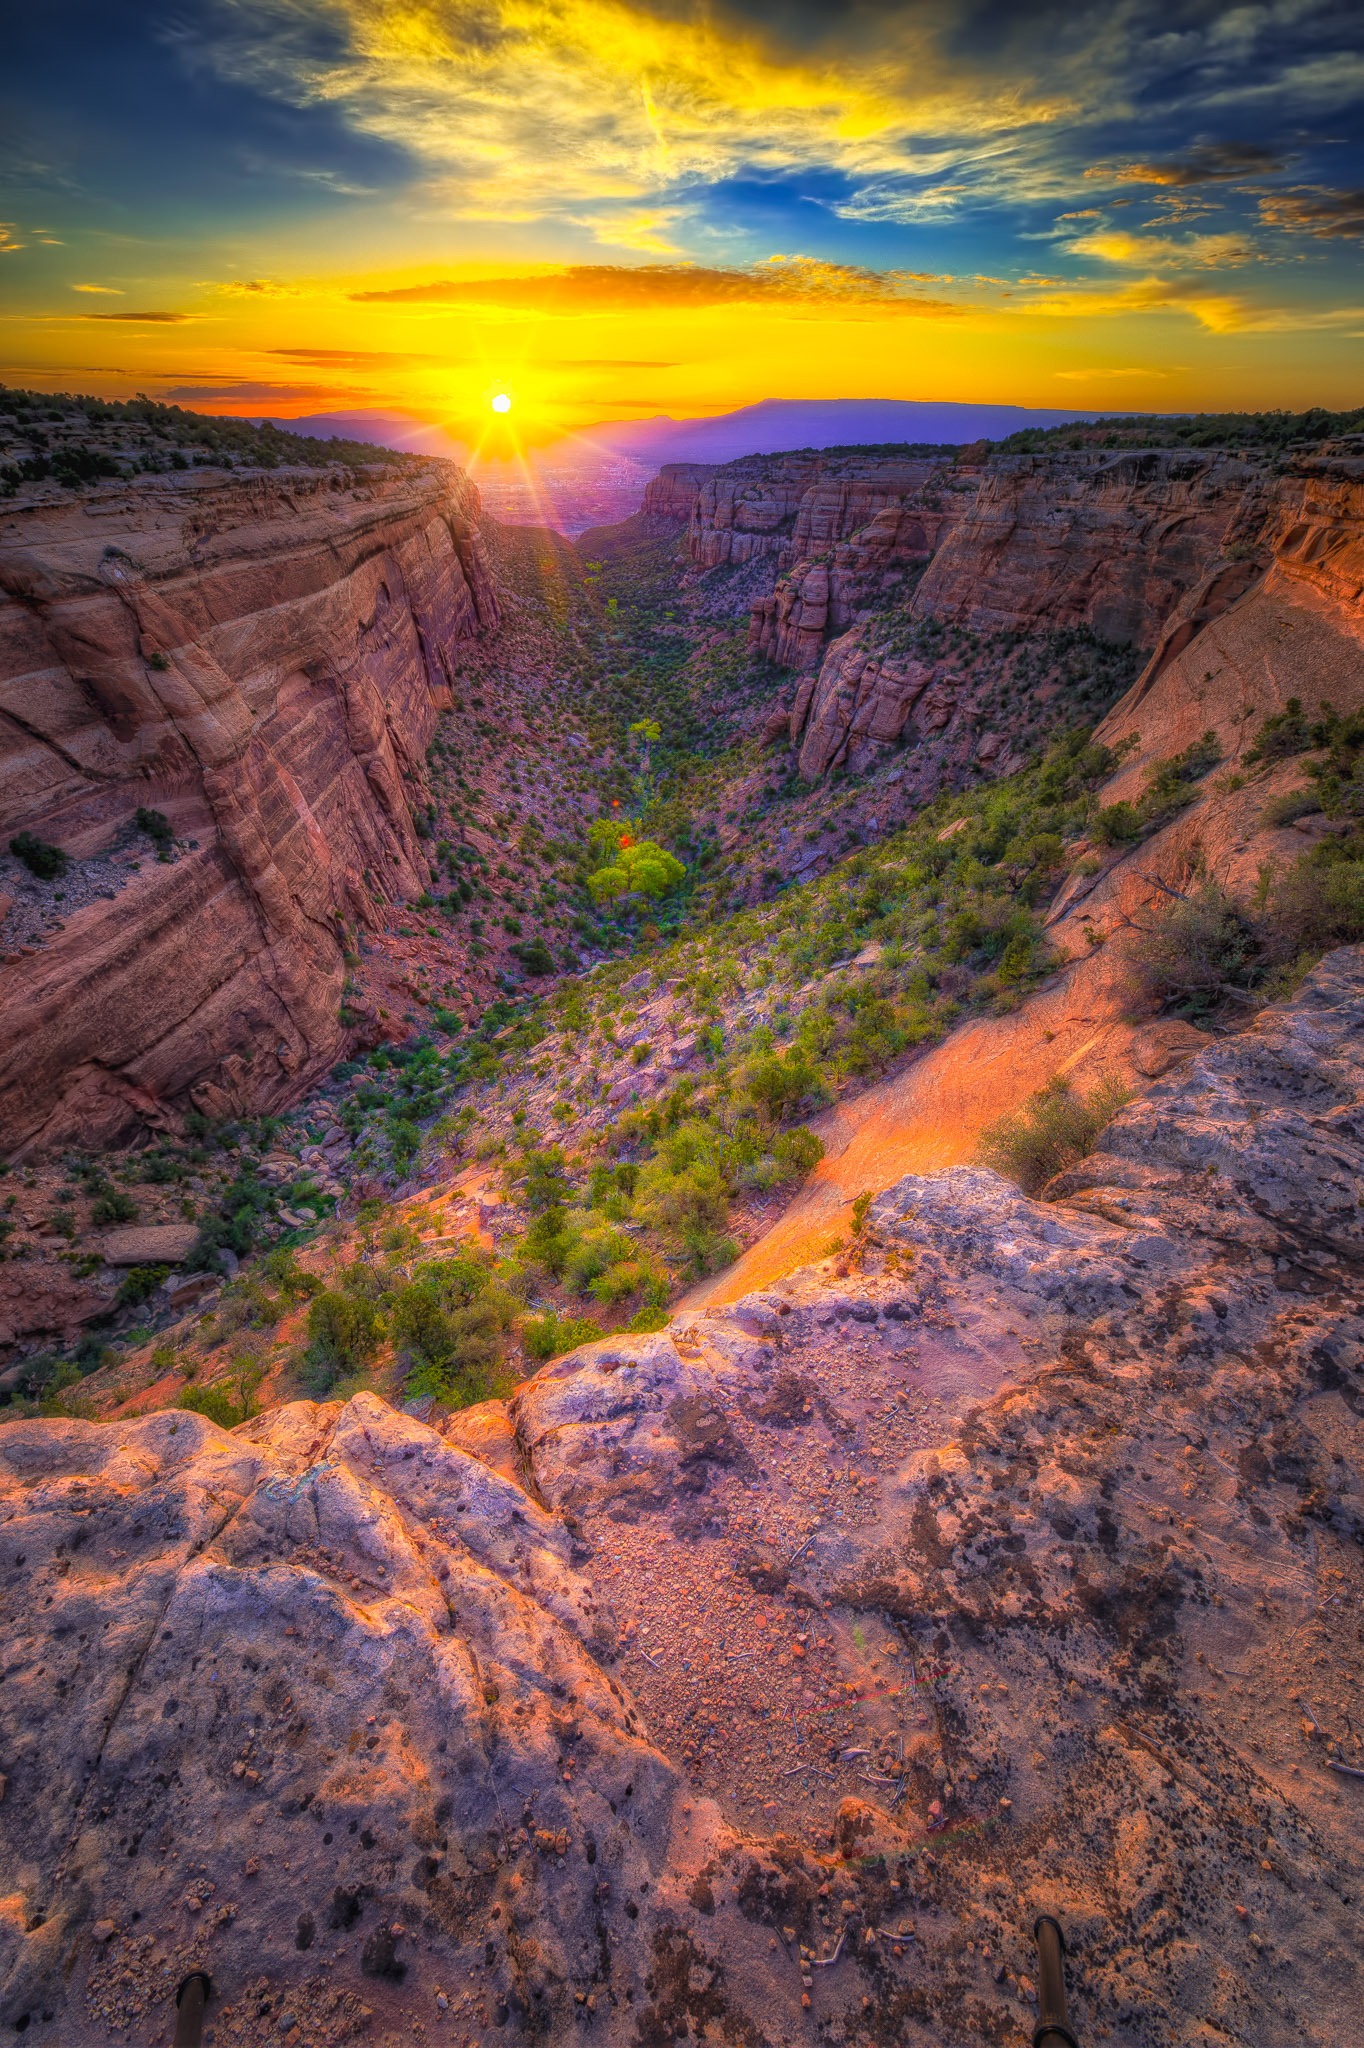 Sunrise illuminates Red Canyon in Colorado National Monument, near Grand Junction, on the Colorado Plateau.